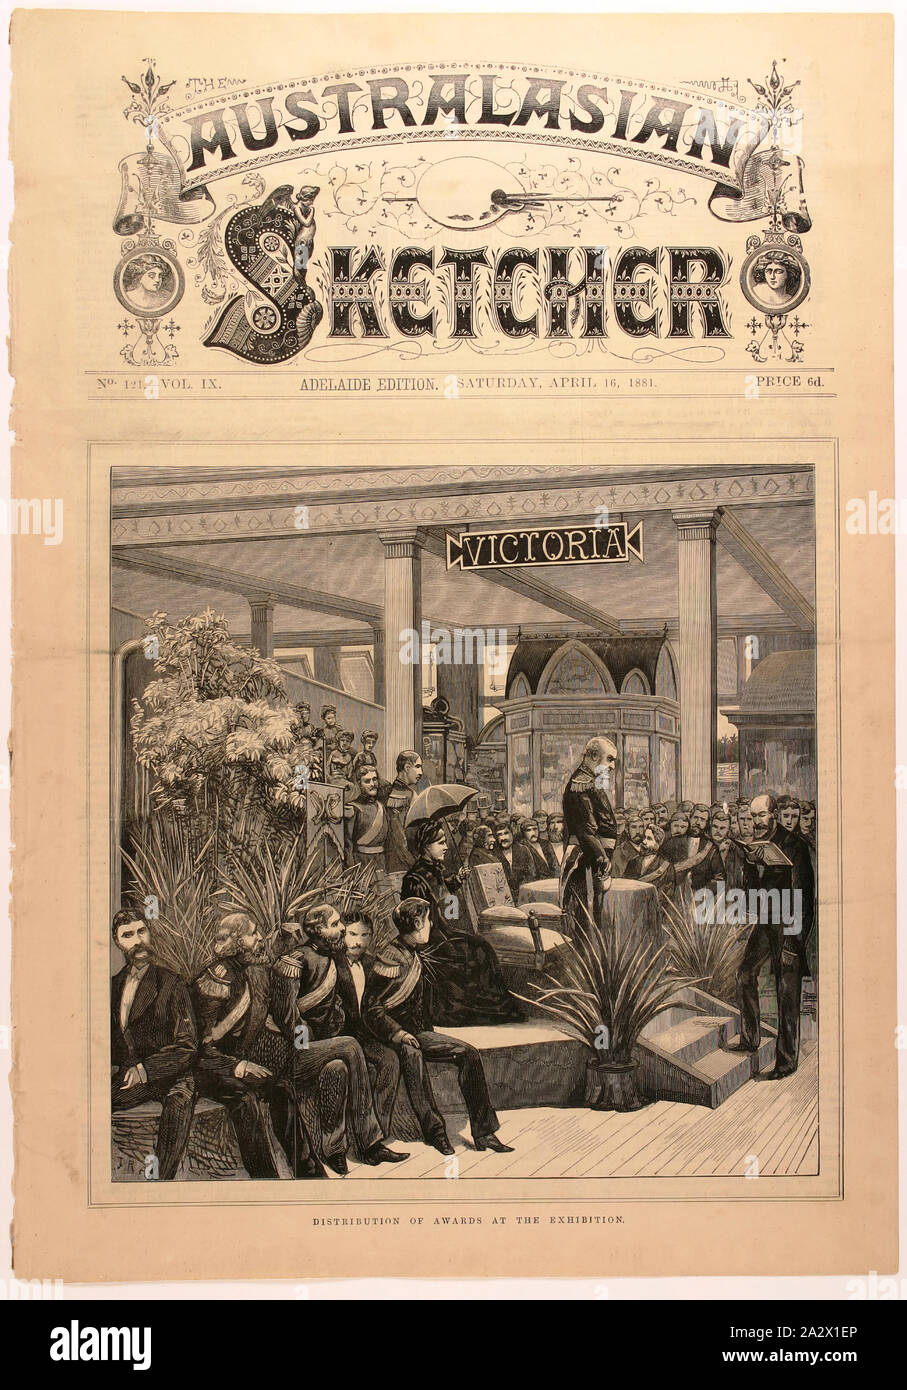 Newspaper Cutting - 'Distribution of Awards', The Australasian Sketcher, Adelaide, 16 Apr 1881, Coverage of the 'Distribution of Awards' at the Melbourne International Exhibition (MIE), printed on pages 113-114 in 'The Australian Sketcher' newspaper, published by G N & W H Birks in Adelaide, 16 April 1881. The front page illustration depicts the awards ceremony, which was held at the (Royal) Exhibition Building on 22 March 1881. The Governor of Victoria, George Augustus Constantine Phipps Stock Photo